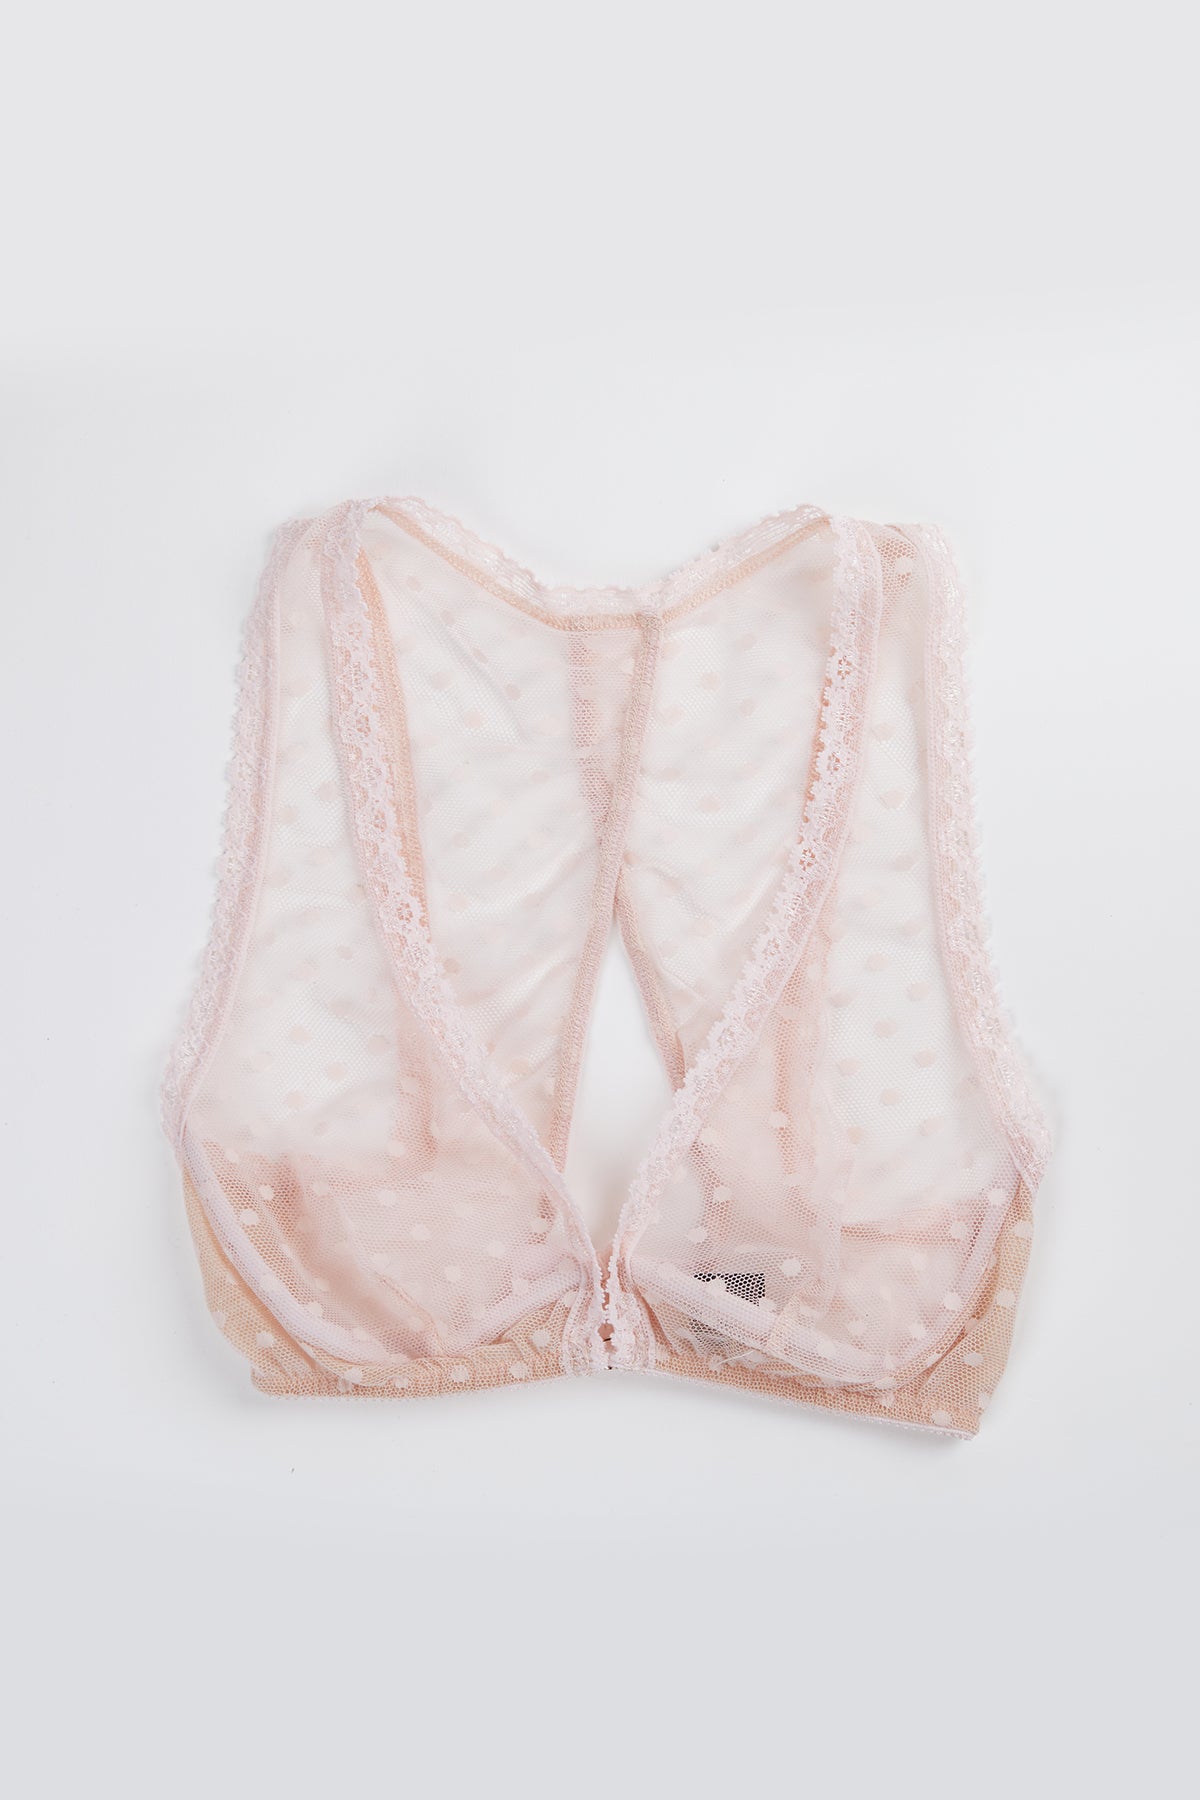 ONLY HEARTS | PINK COUCOU LOLA SOFT CUP BRA | The Silence Company